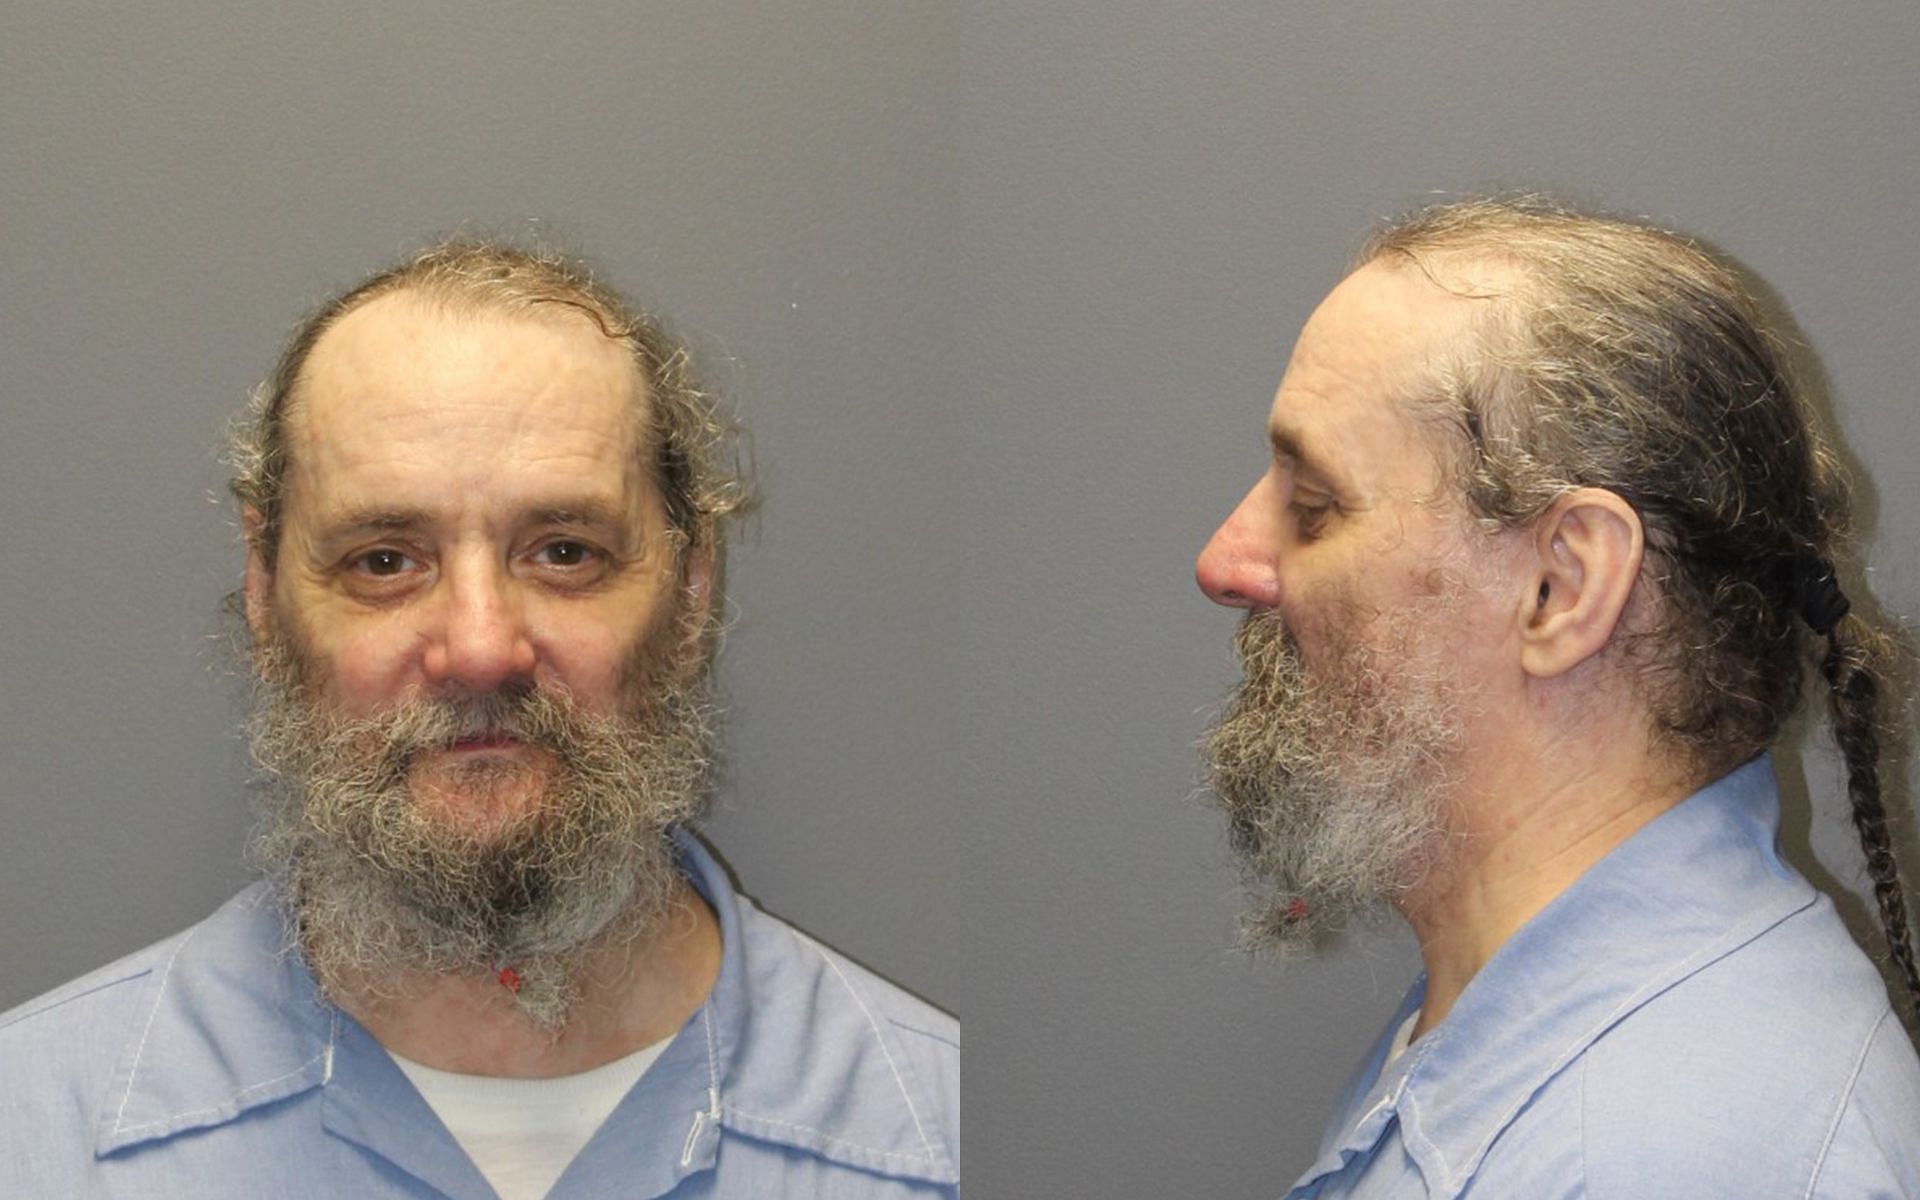 Roger Allen Morton is currently serving his time in prison with no chance of parole (Image via Investigation Discovery)